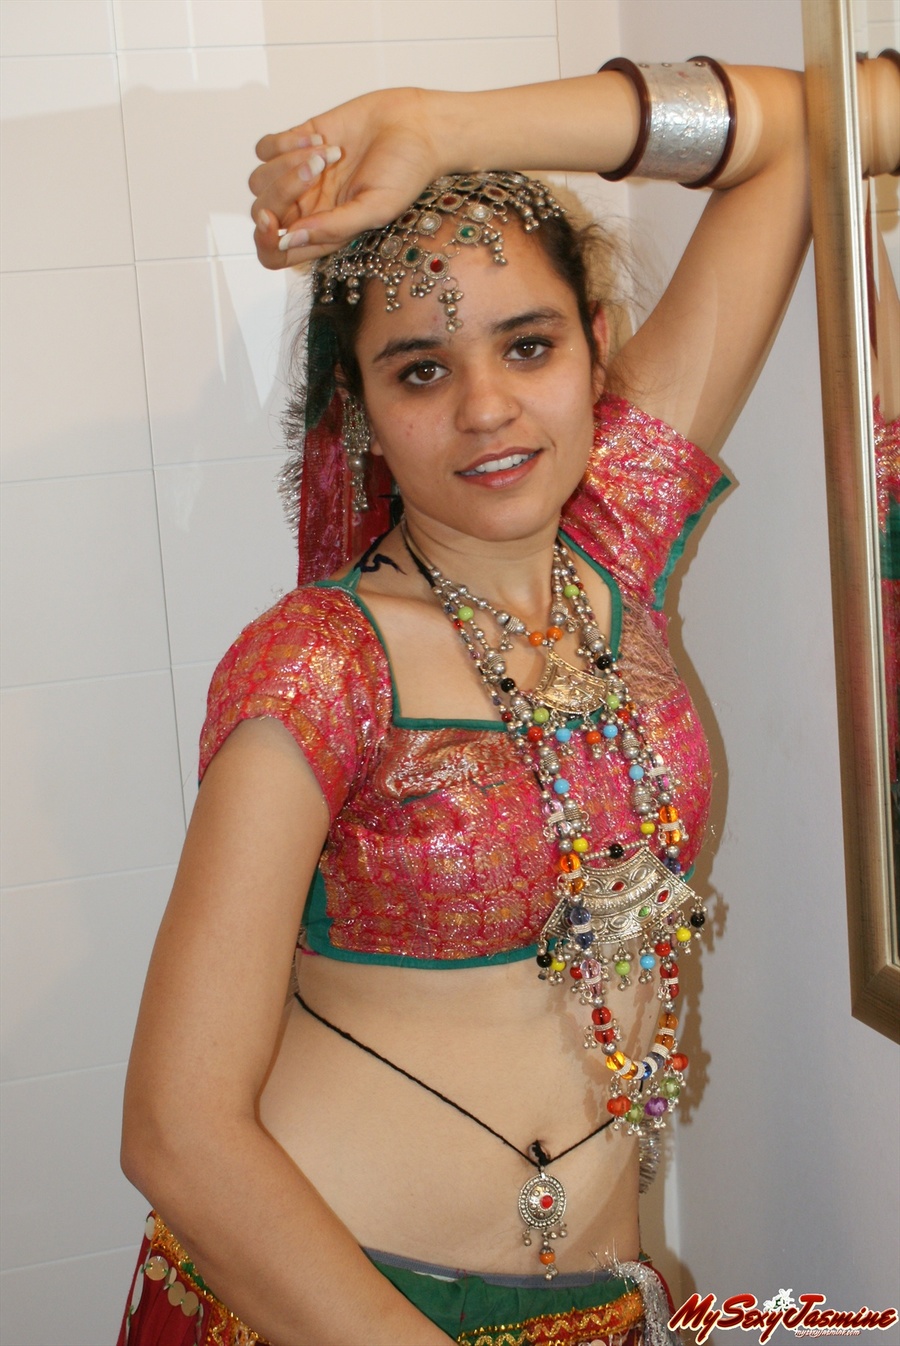 Nude Sexy Indian Costume - Sexy Indian girl in national costume and jewelry takes off her clothes and  stays naked in her ornaments. Picture 2.